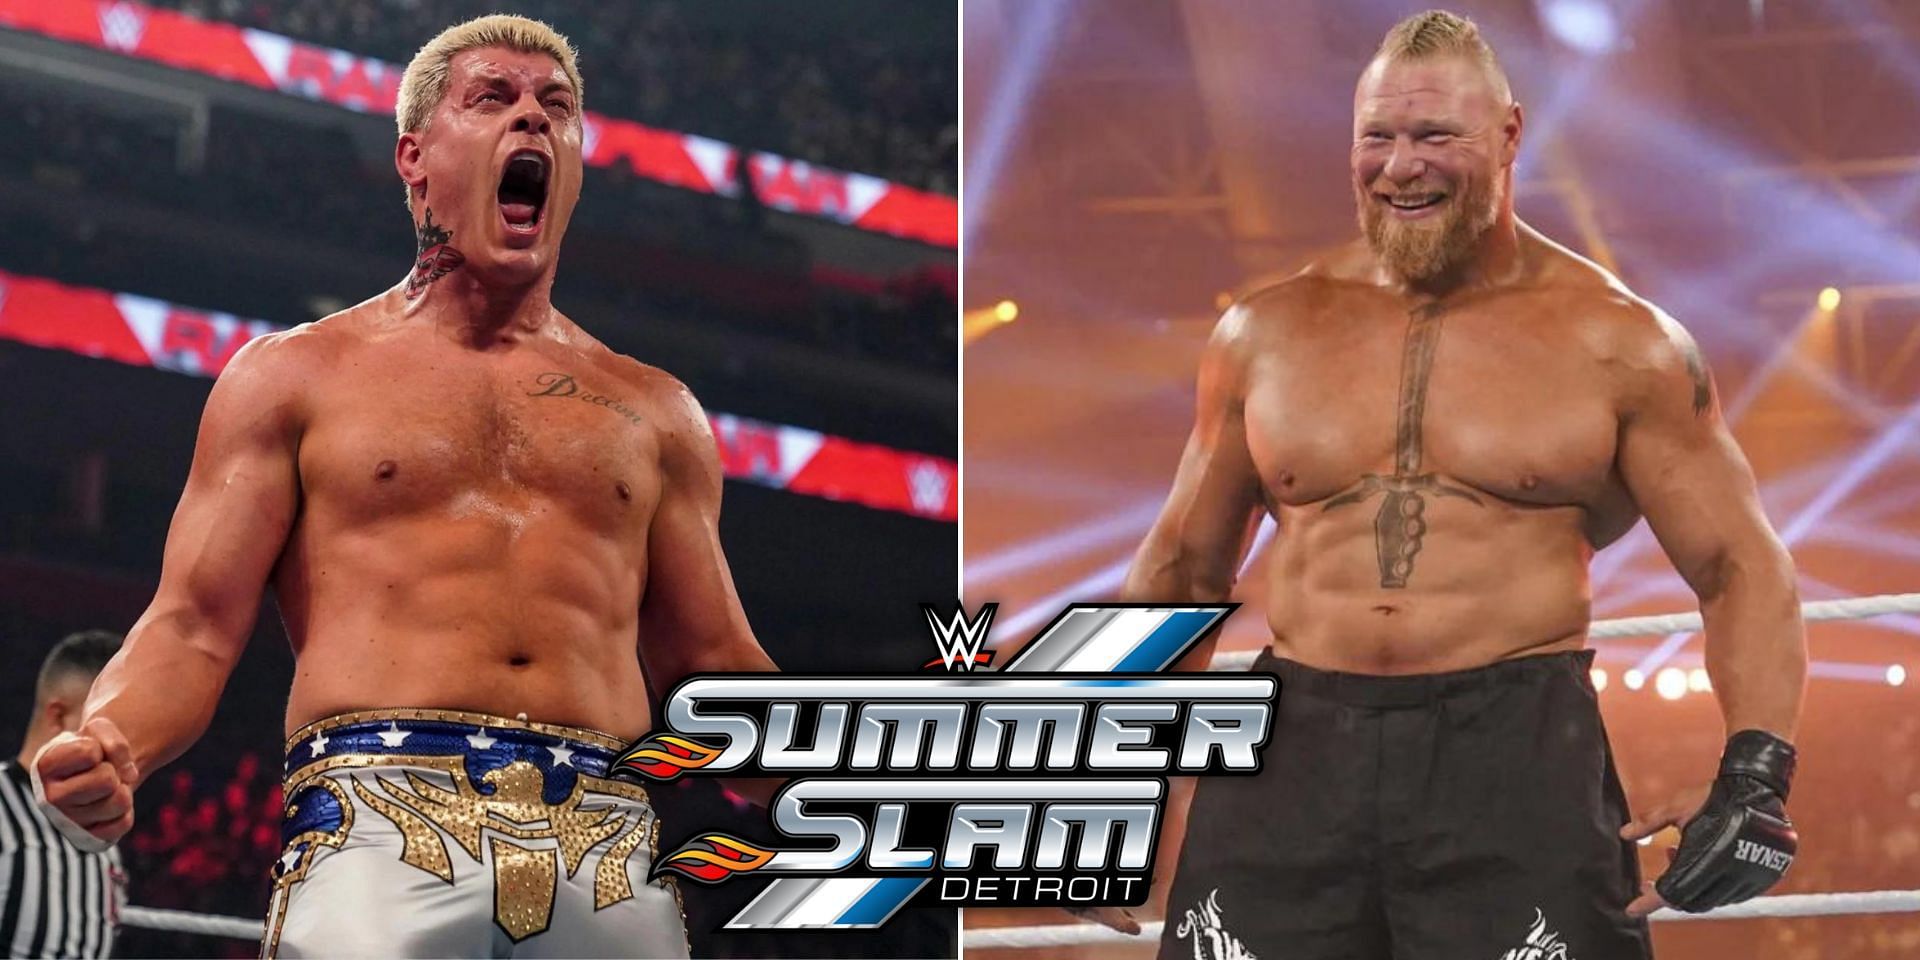 Cody Rhodes wants another match against Brock Lesnar